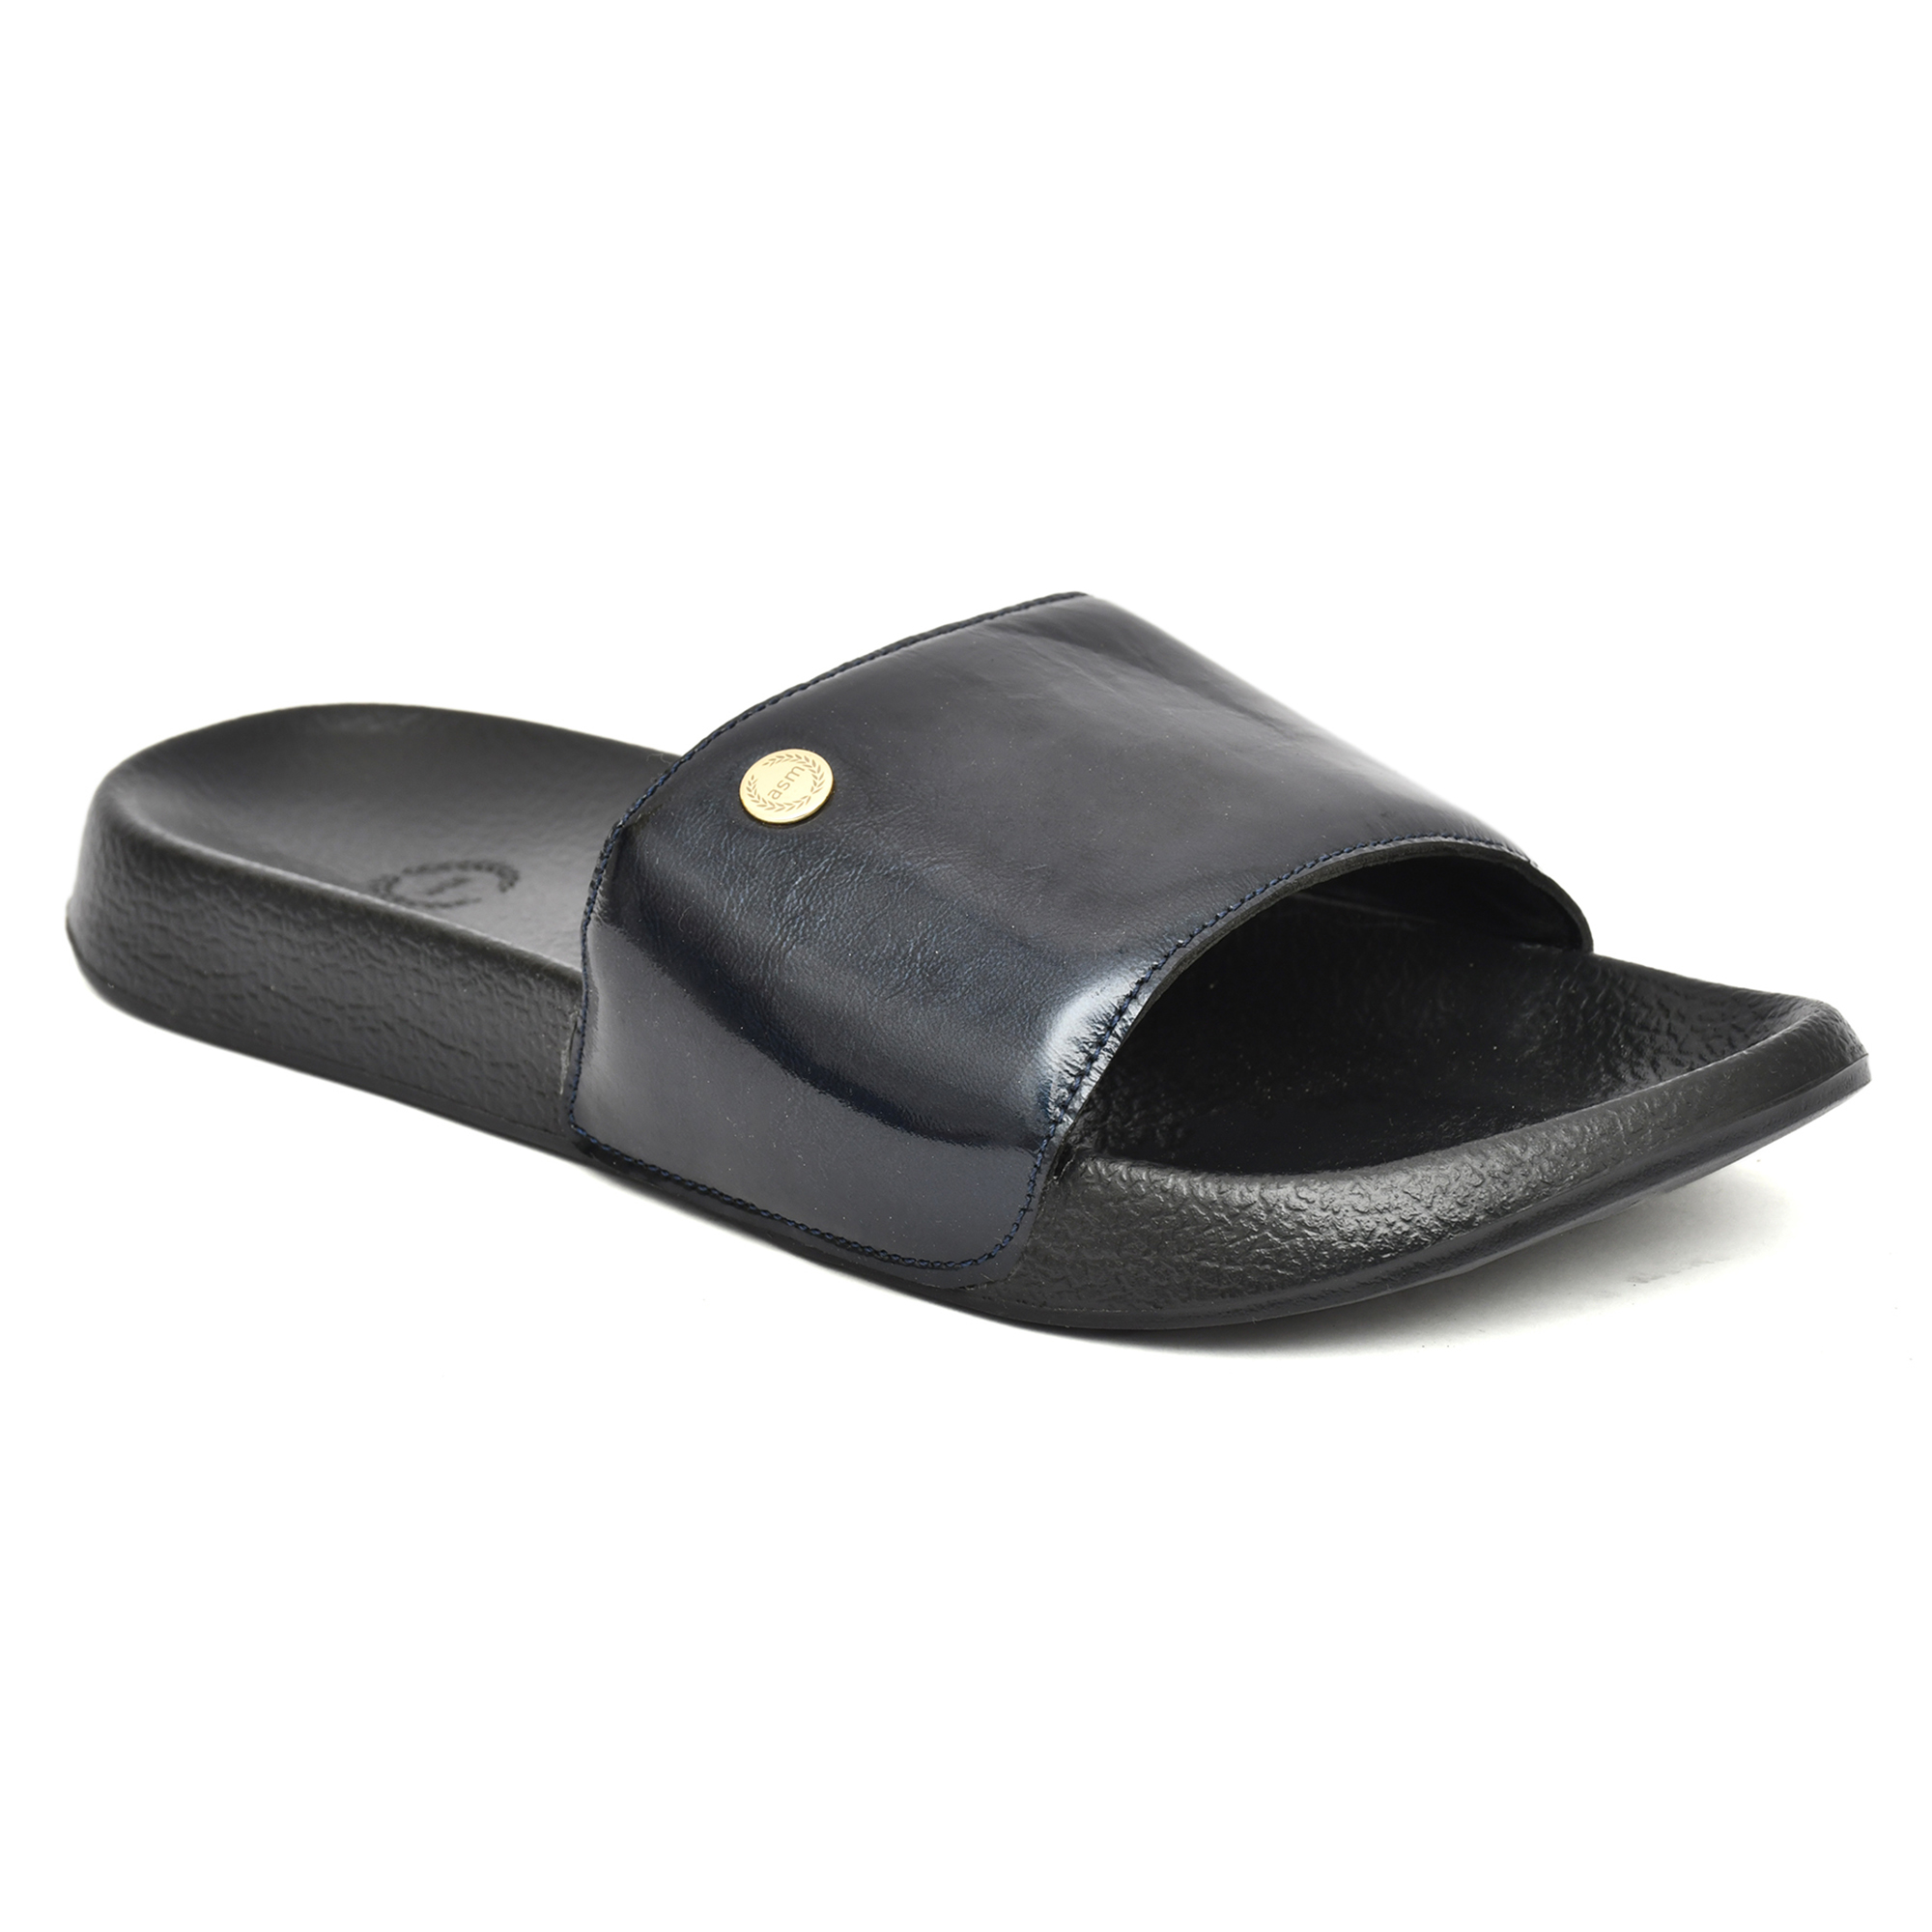 Blue Patent Leather Slippers for Men by asm.